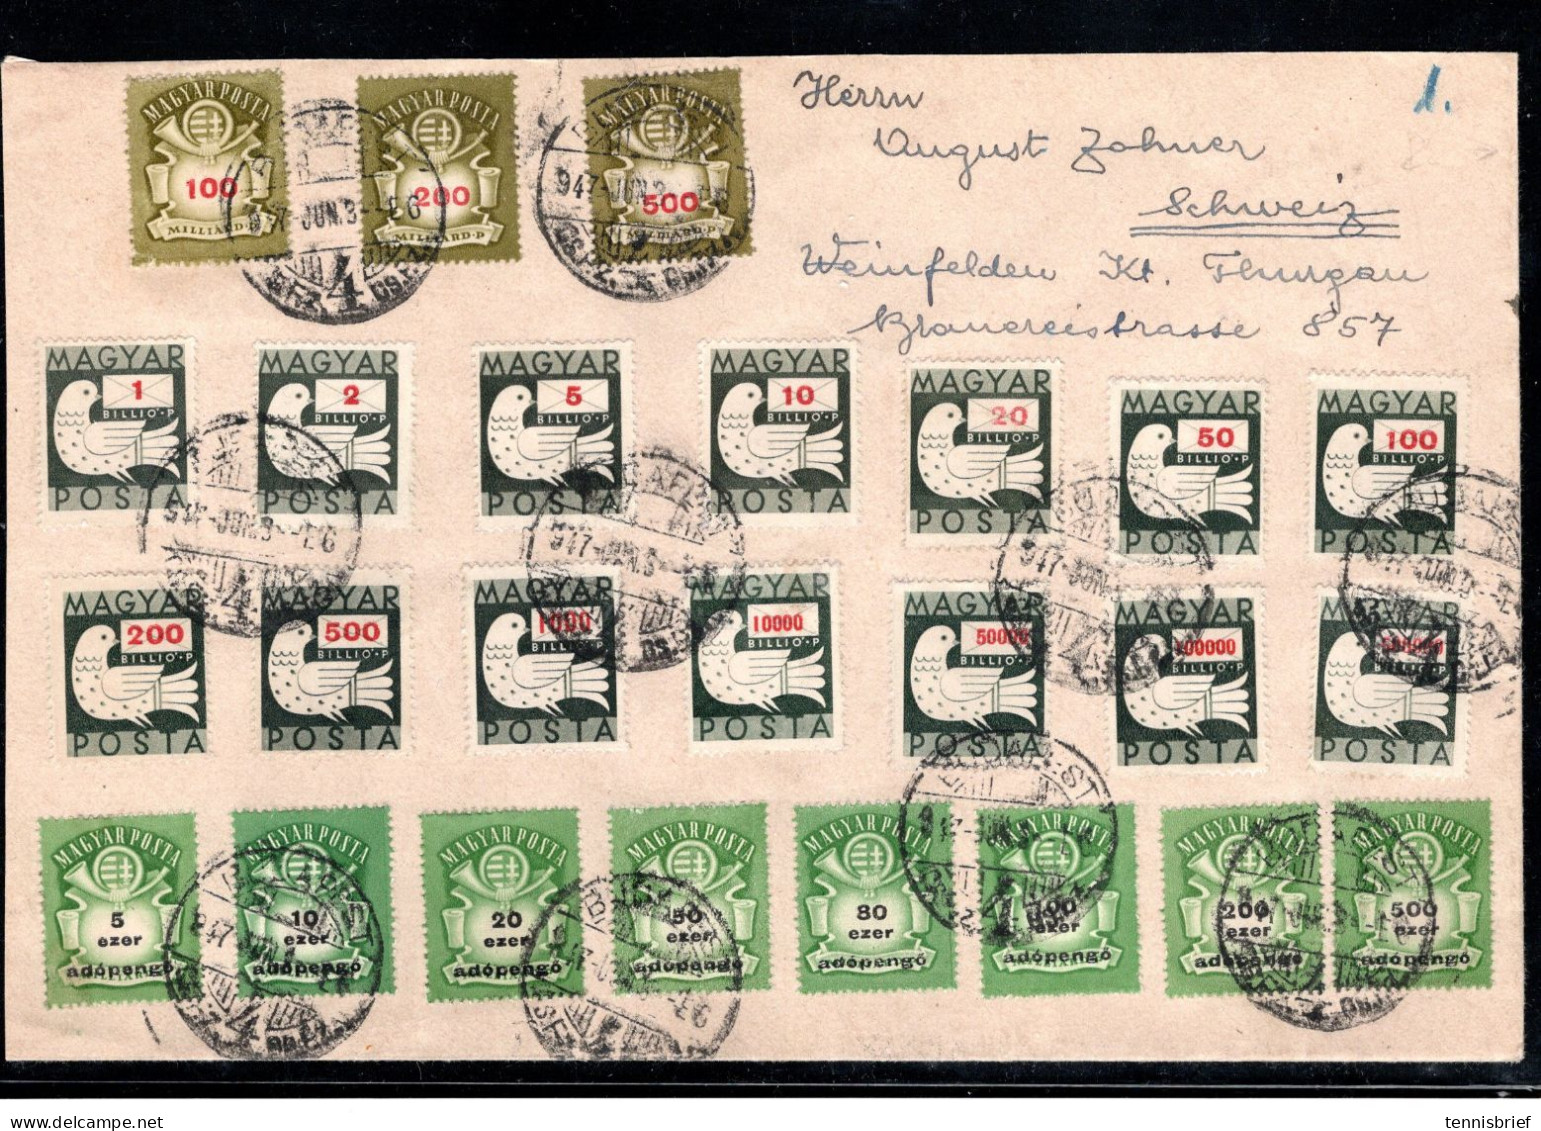 1947 , Inflation Cover , Set Franking , High Values , Cover To Switzerland , Rare On Cover !! # 1495 - Brieven En Documenten